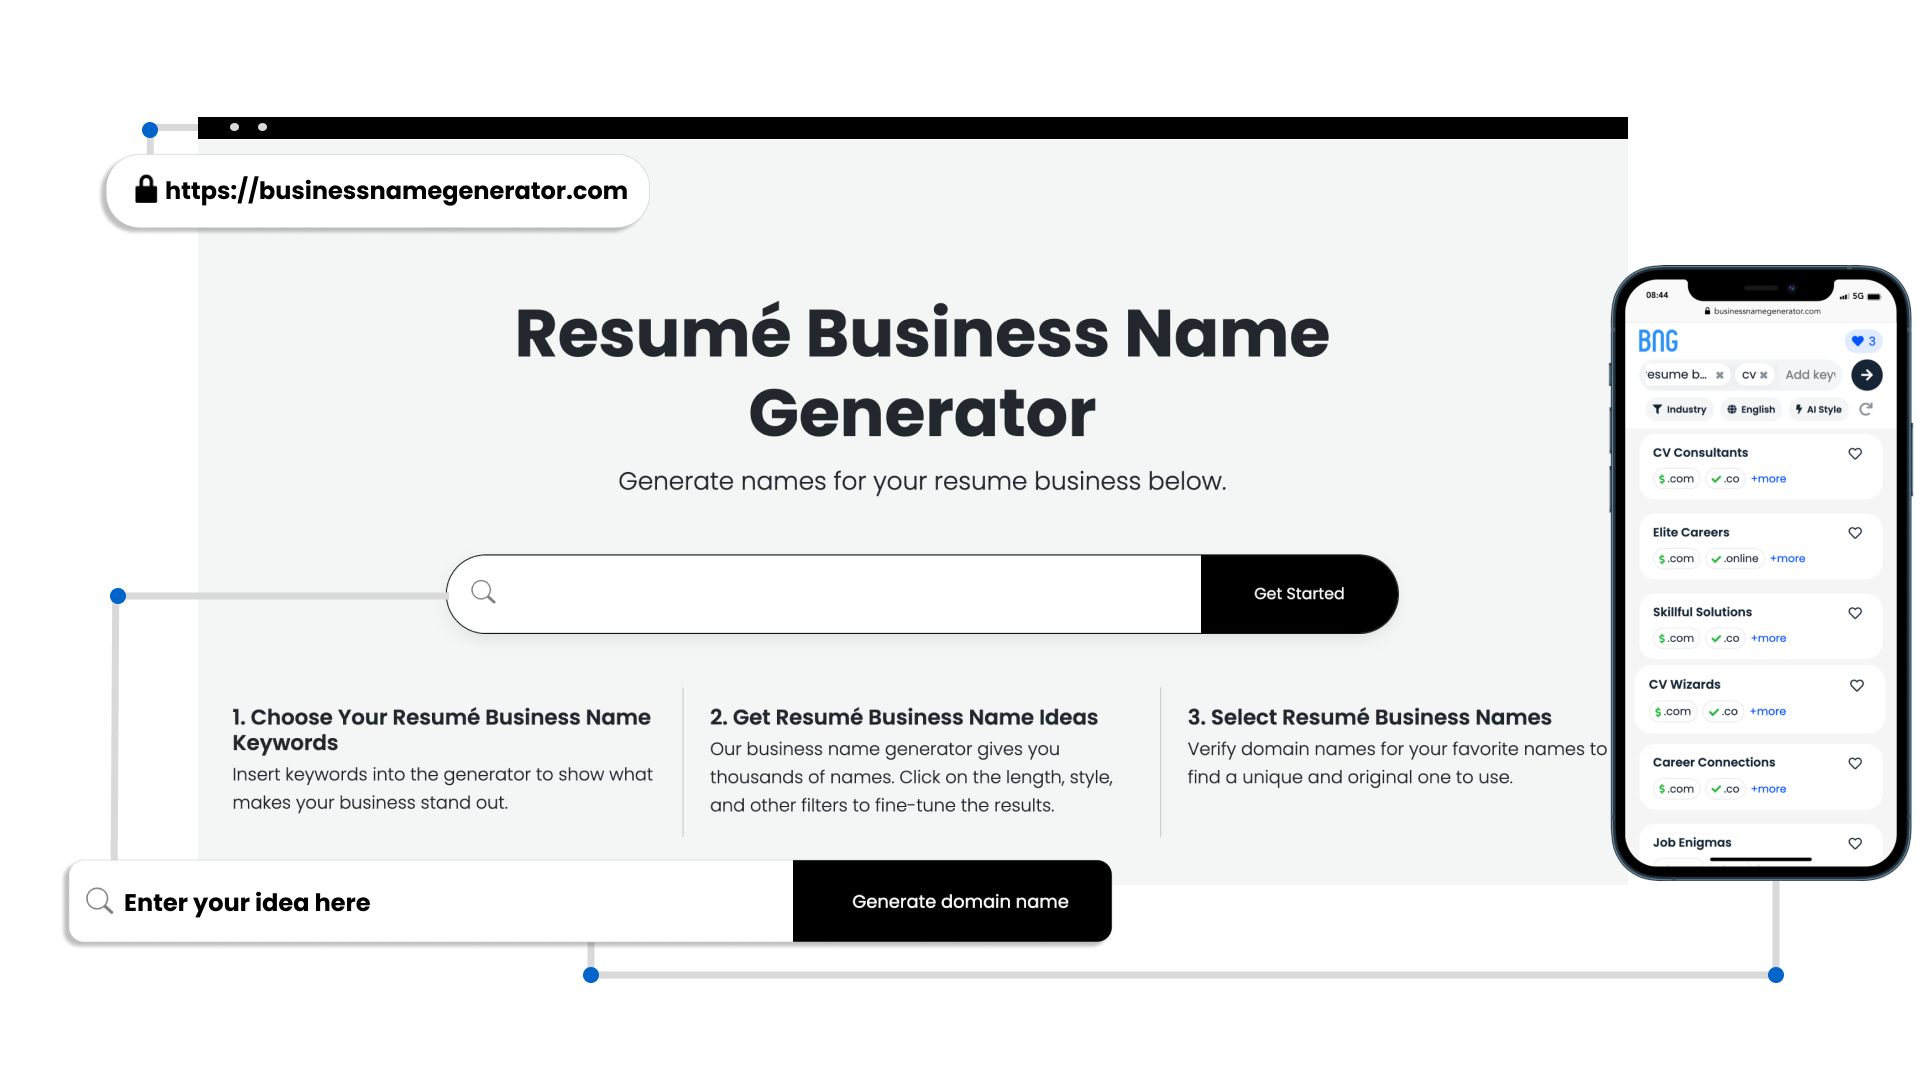 Benefits of Our Resume Business Name Generator